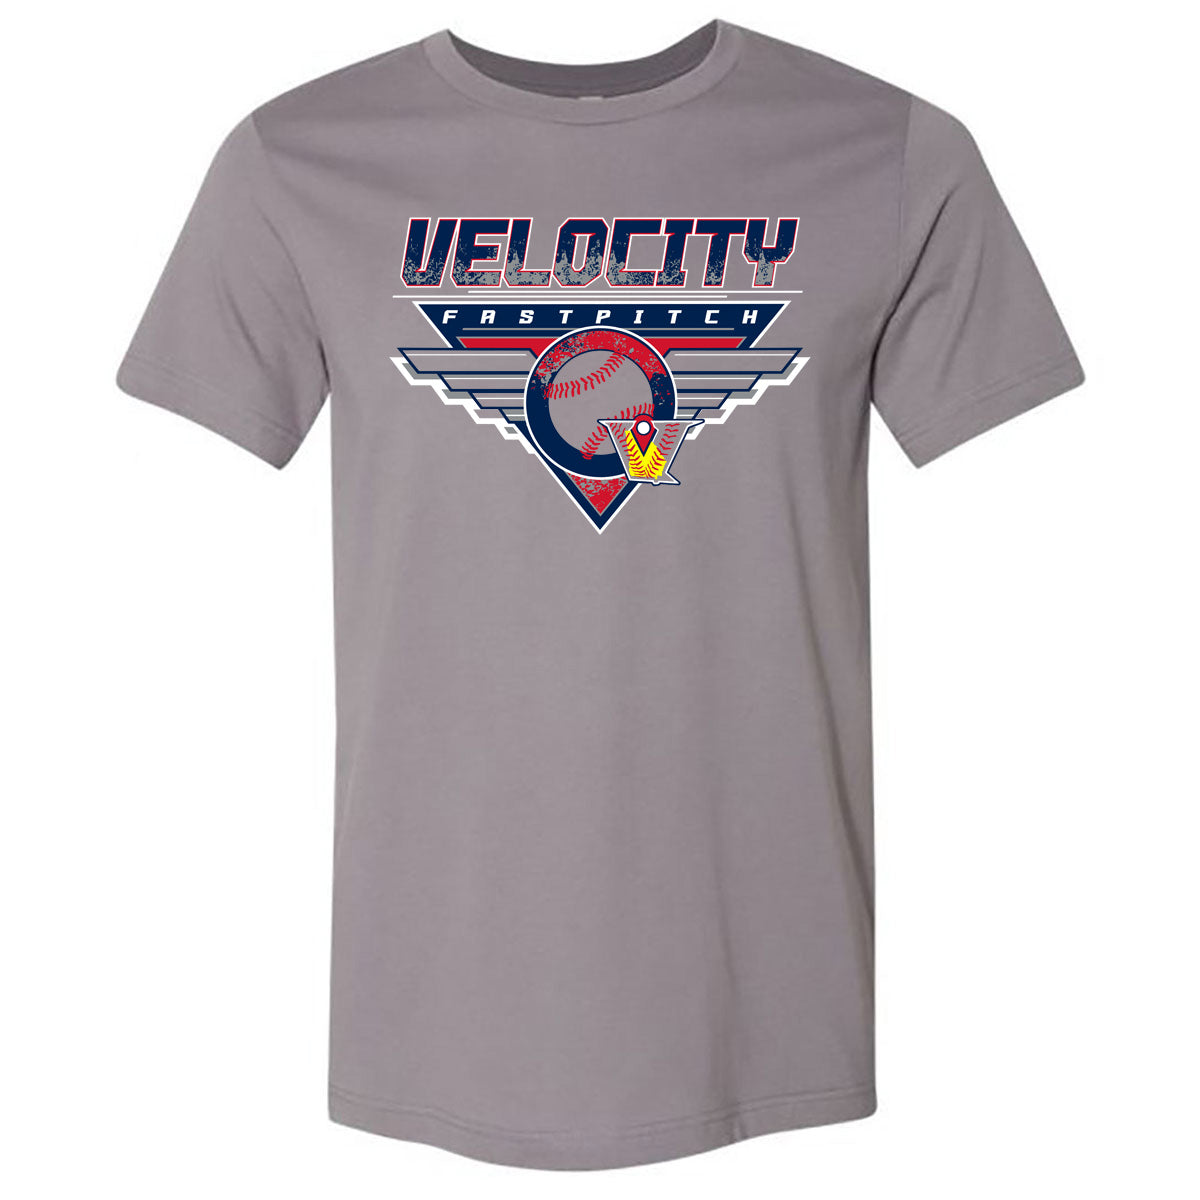 Velo FP - Velocity Fastpitch Triangle - Storm Short Sleeves (Tee/Hoodie/Sweatshirt) - Southern Grace Creations